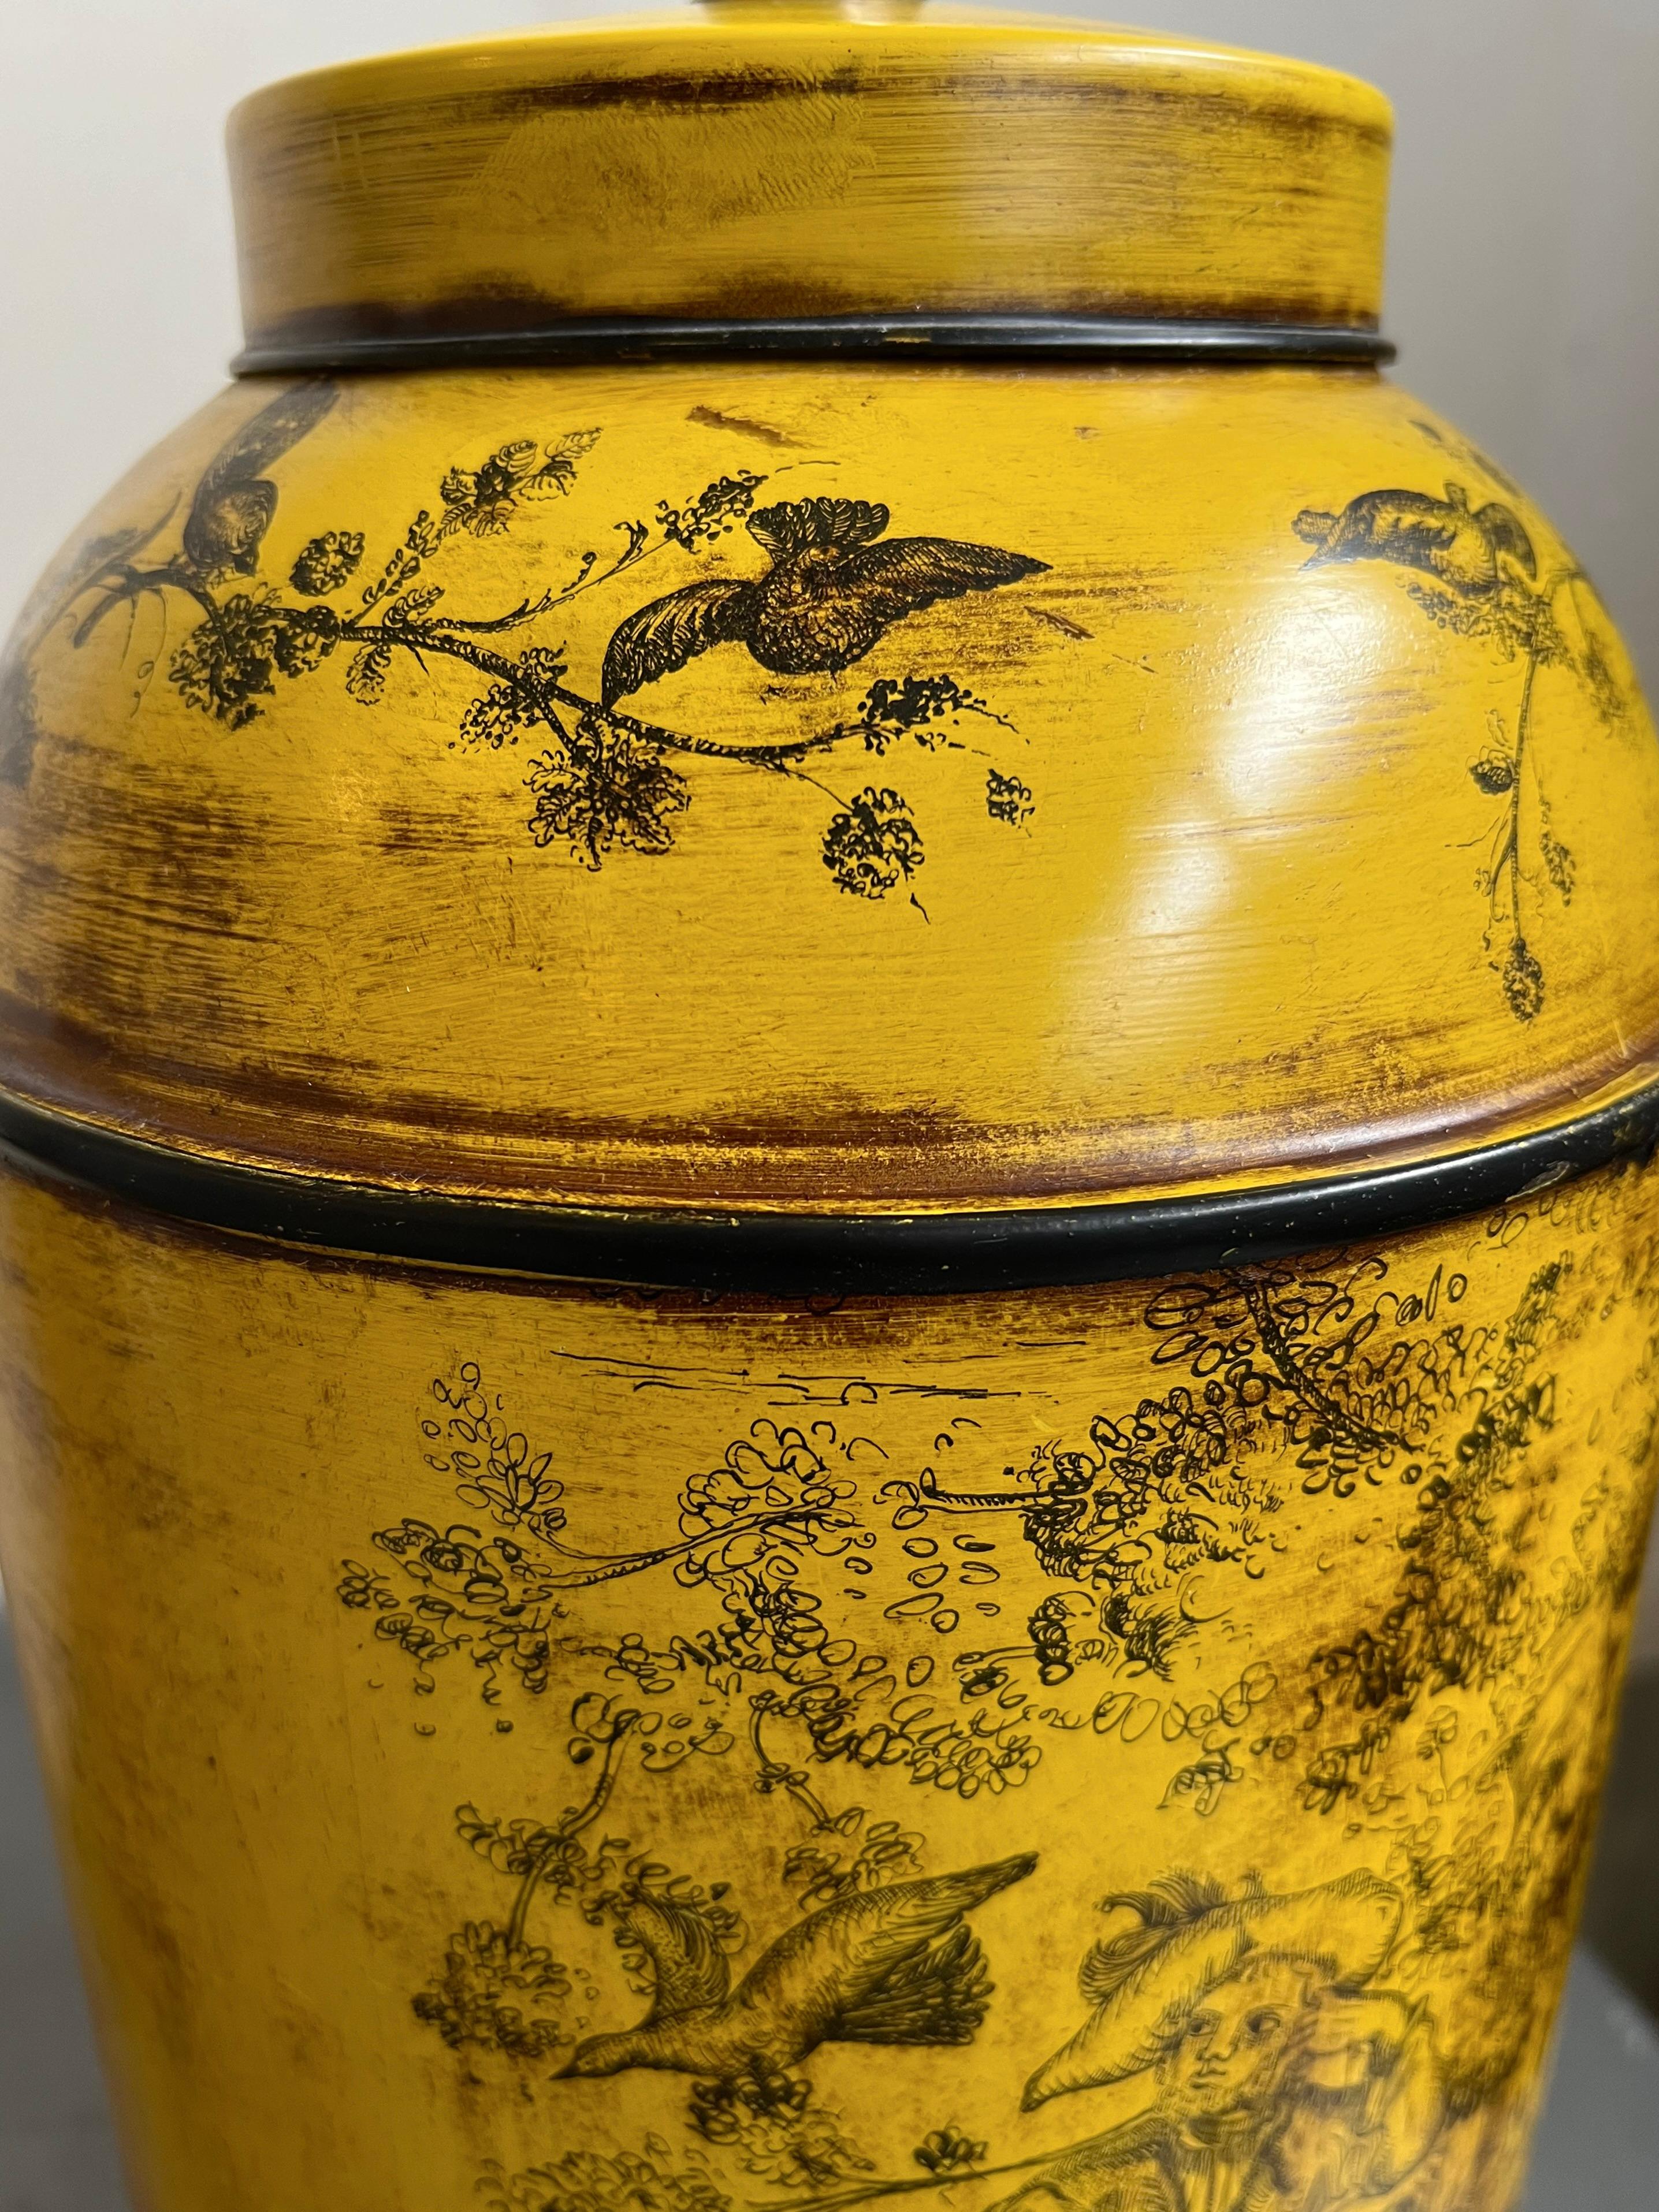 This is a 1970s French provincial-style Frederick Cooper French Tea Canister Lamp in vibrant light mustard-yellow. Delicate hand-painted French Country scenes are depicted throughout. The lamp sits on a round, conforming wood base. The neck is